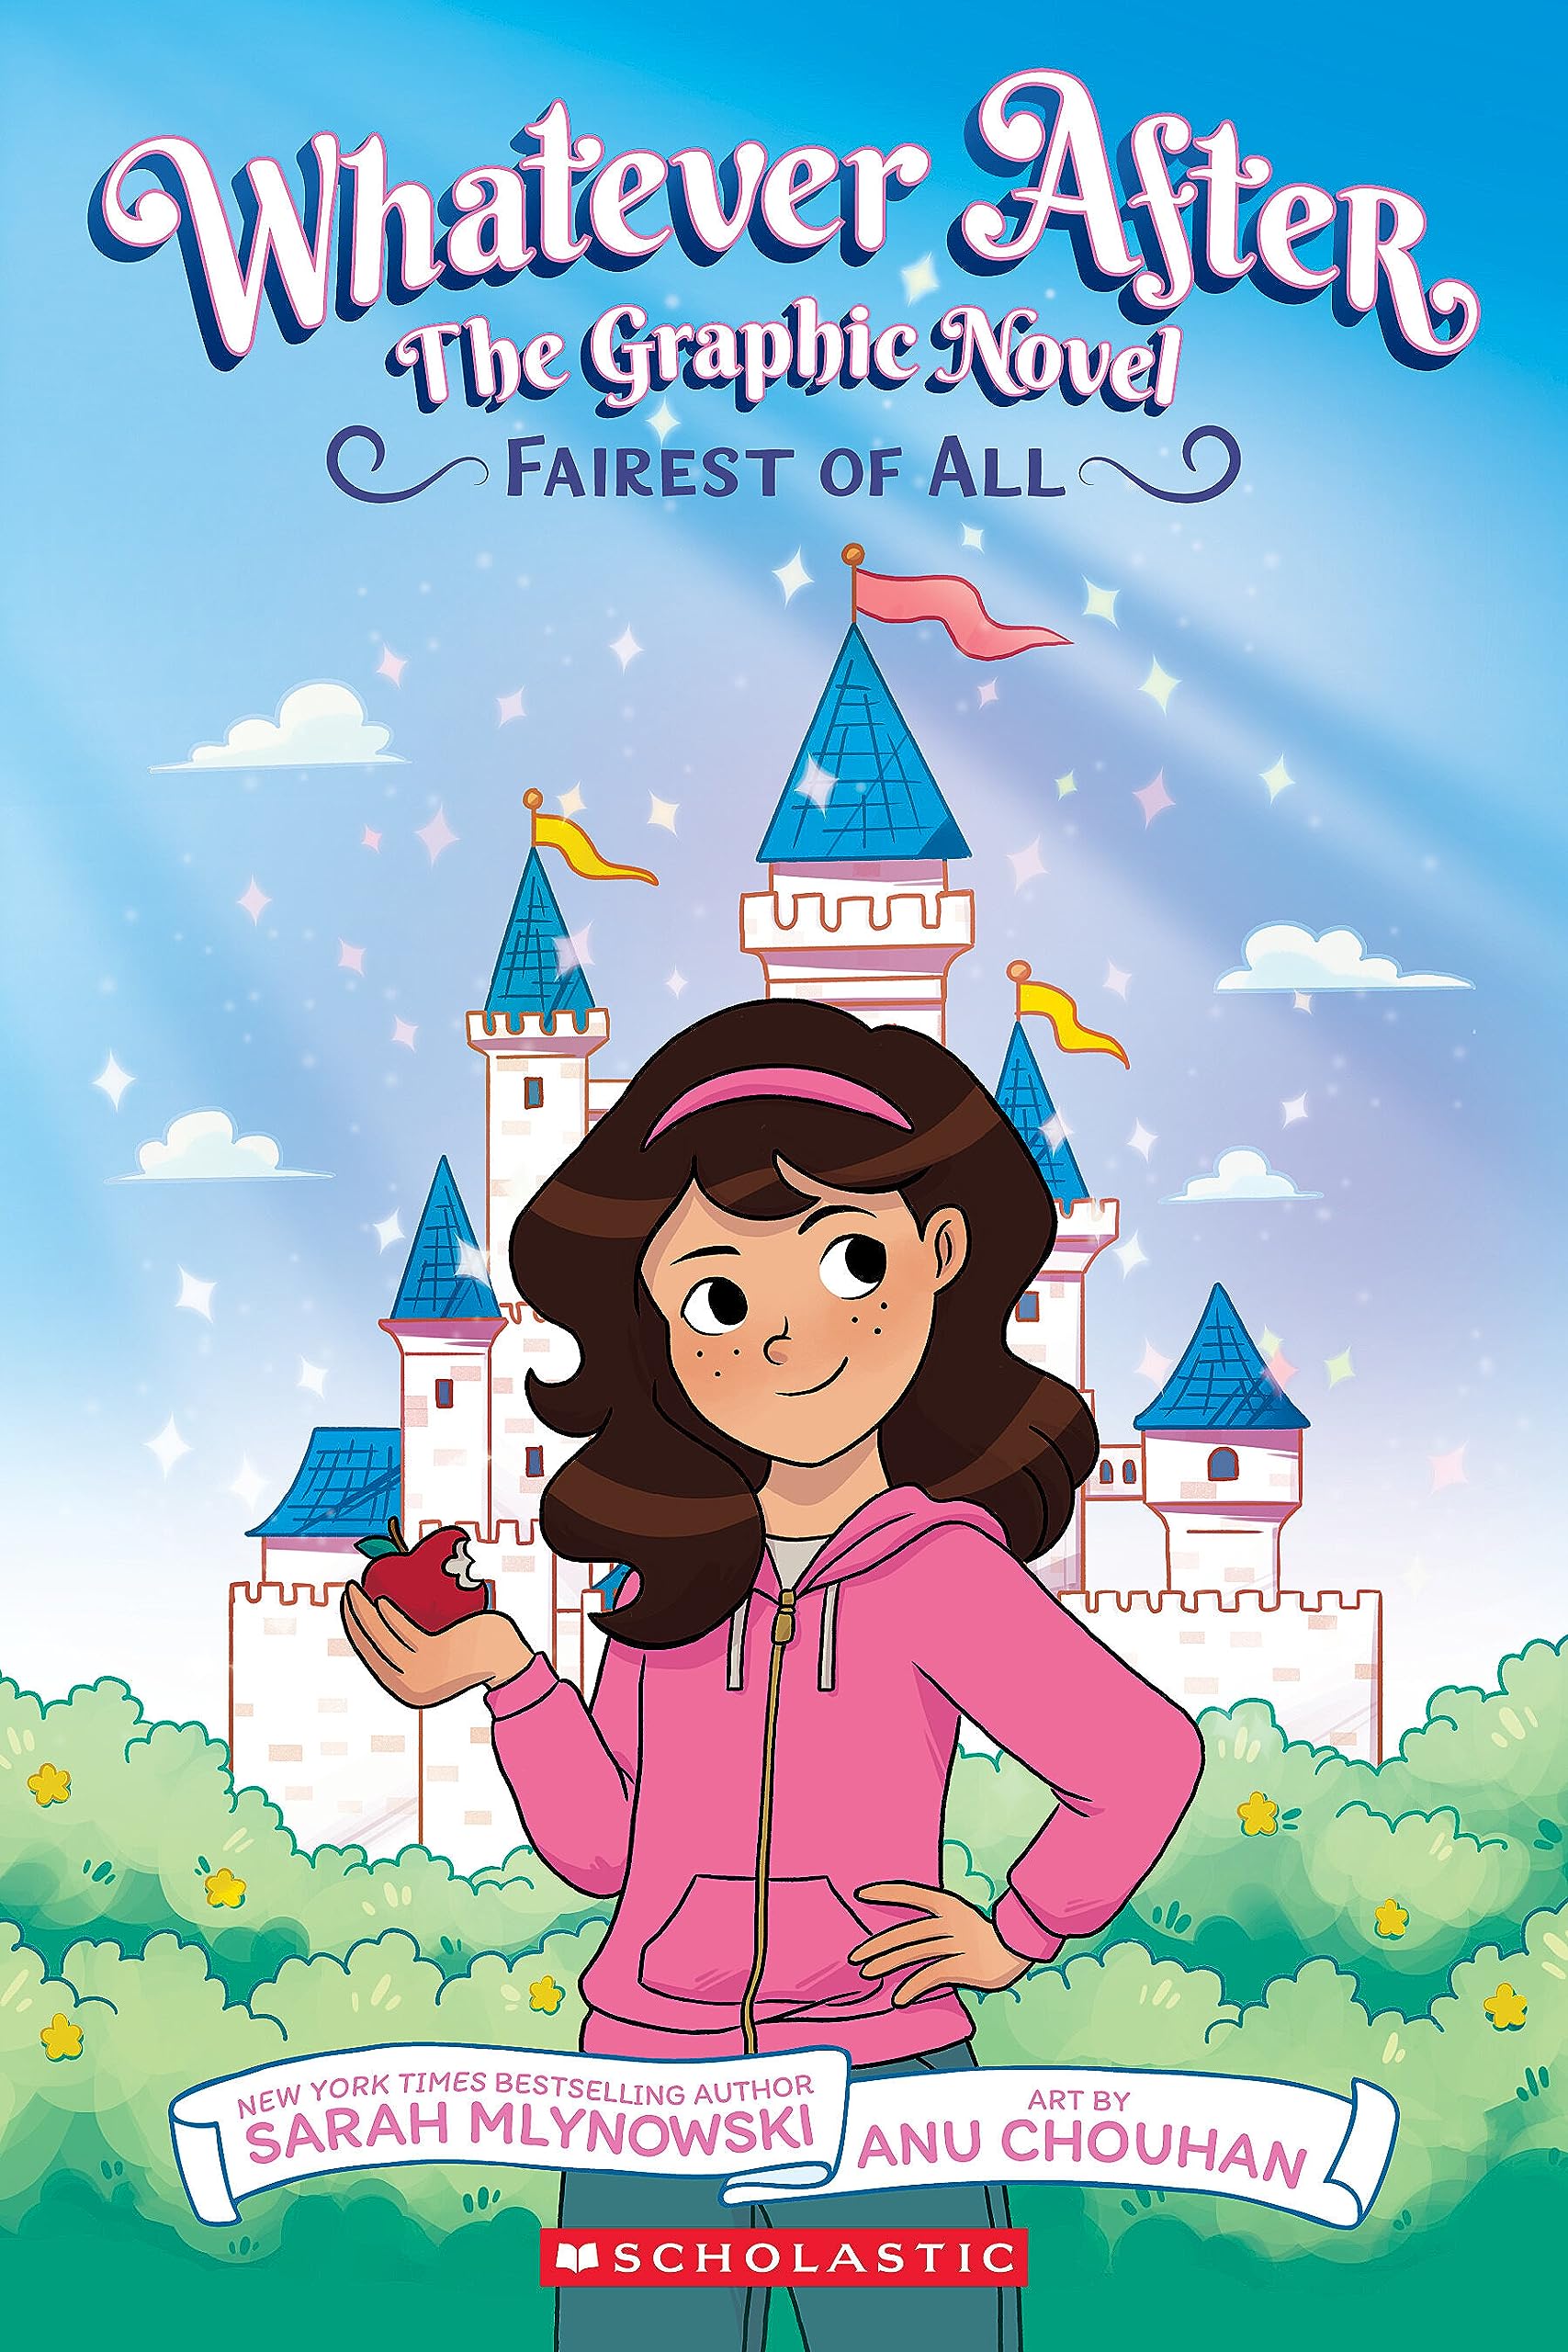 Fairest of All: The Graphic Novel (Whatever After #1)